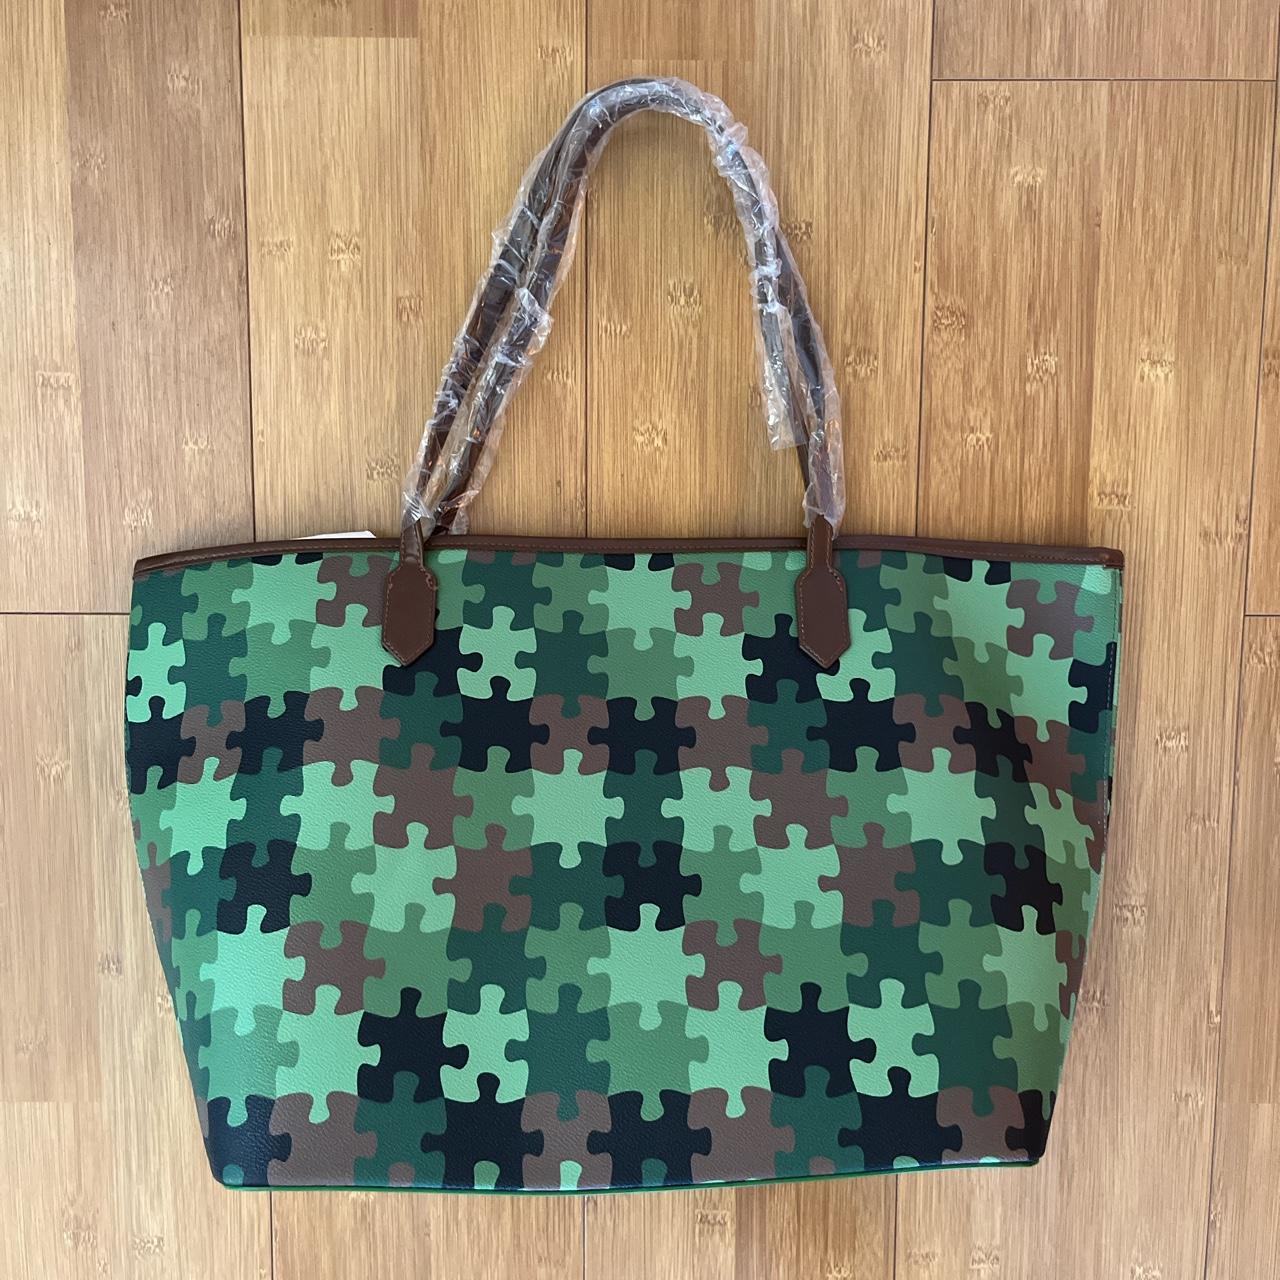 Golf Wang puzzle tote - green/brown. Brand new. - Depop